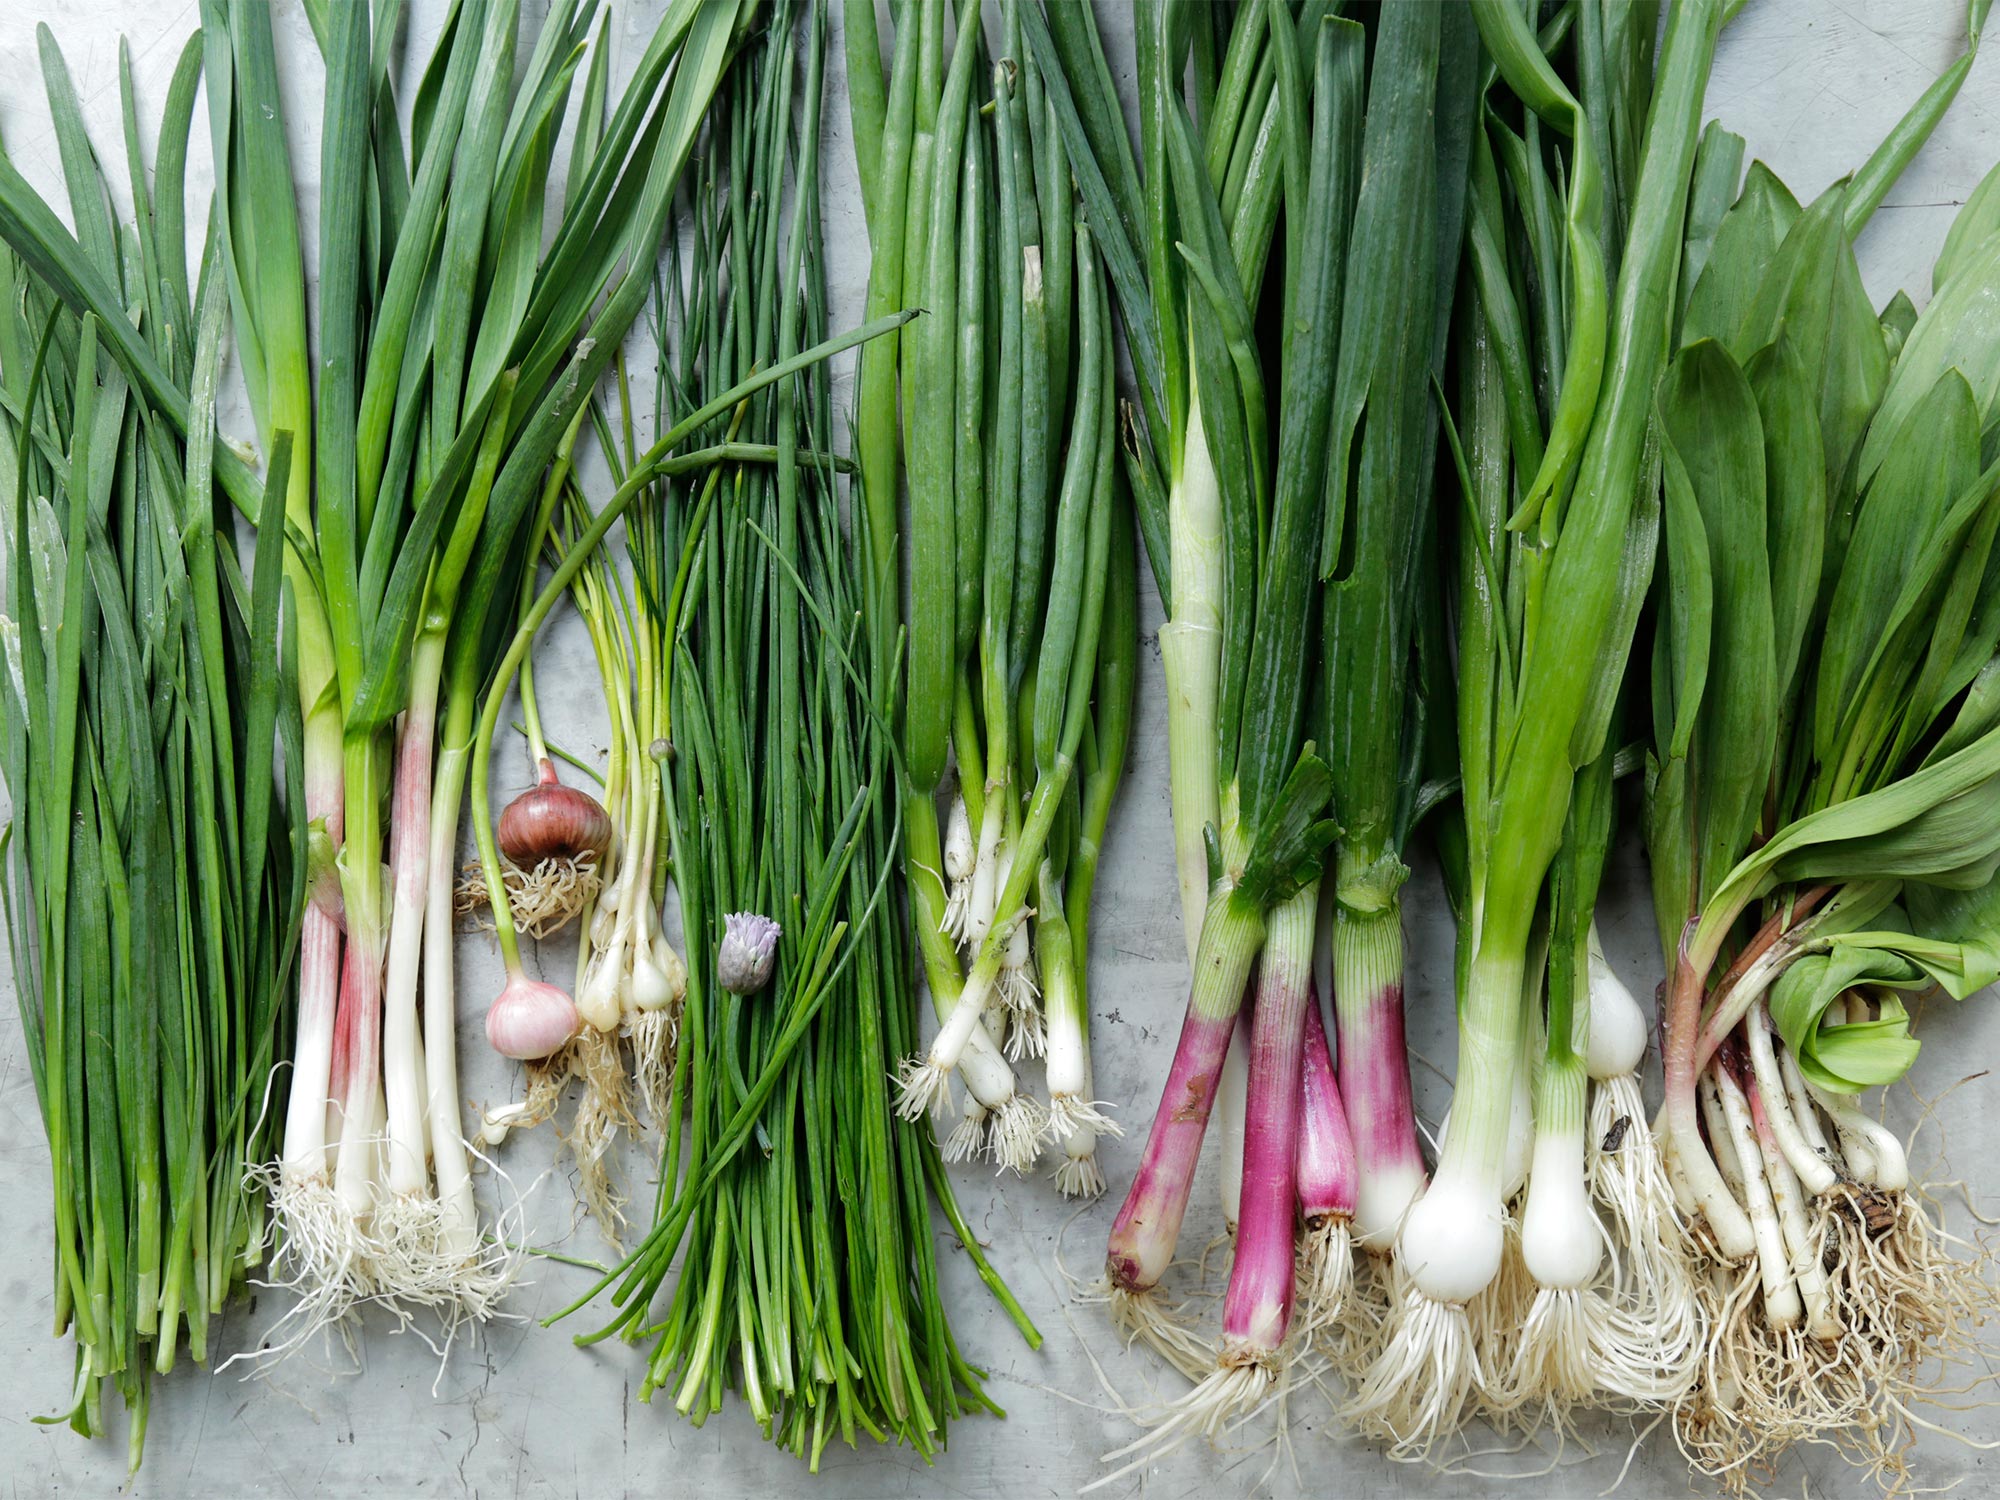 A Beginner's Guide to Spring Alliums, the Best Early Taste of Spring